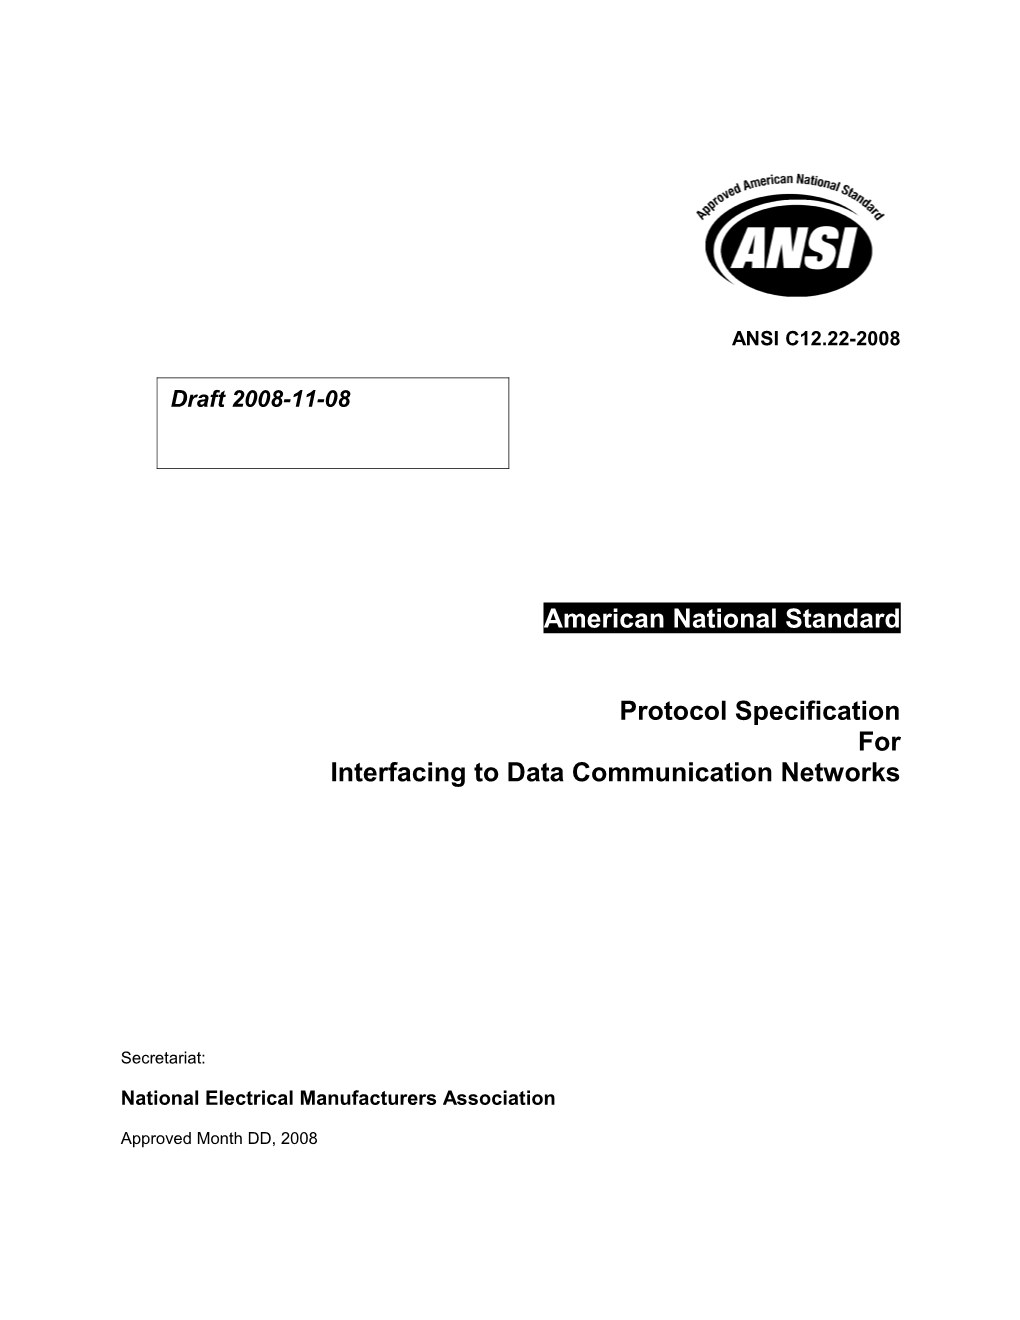 Interfacing to Data Communication Networks